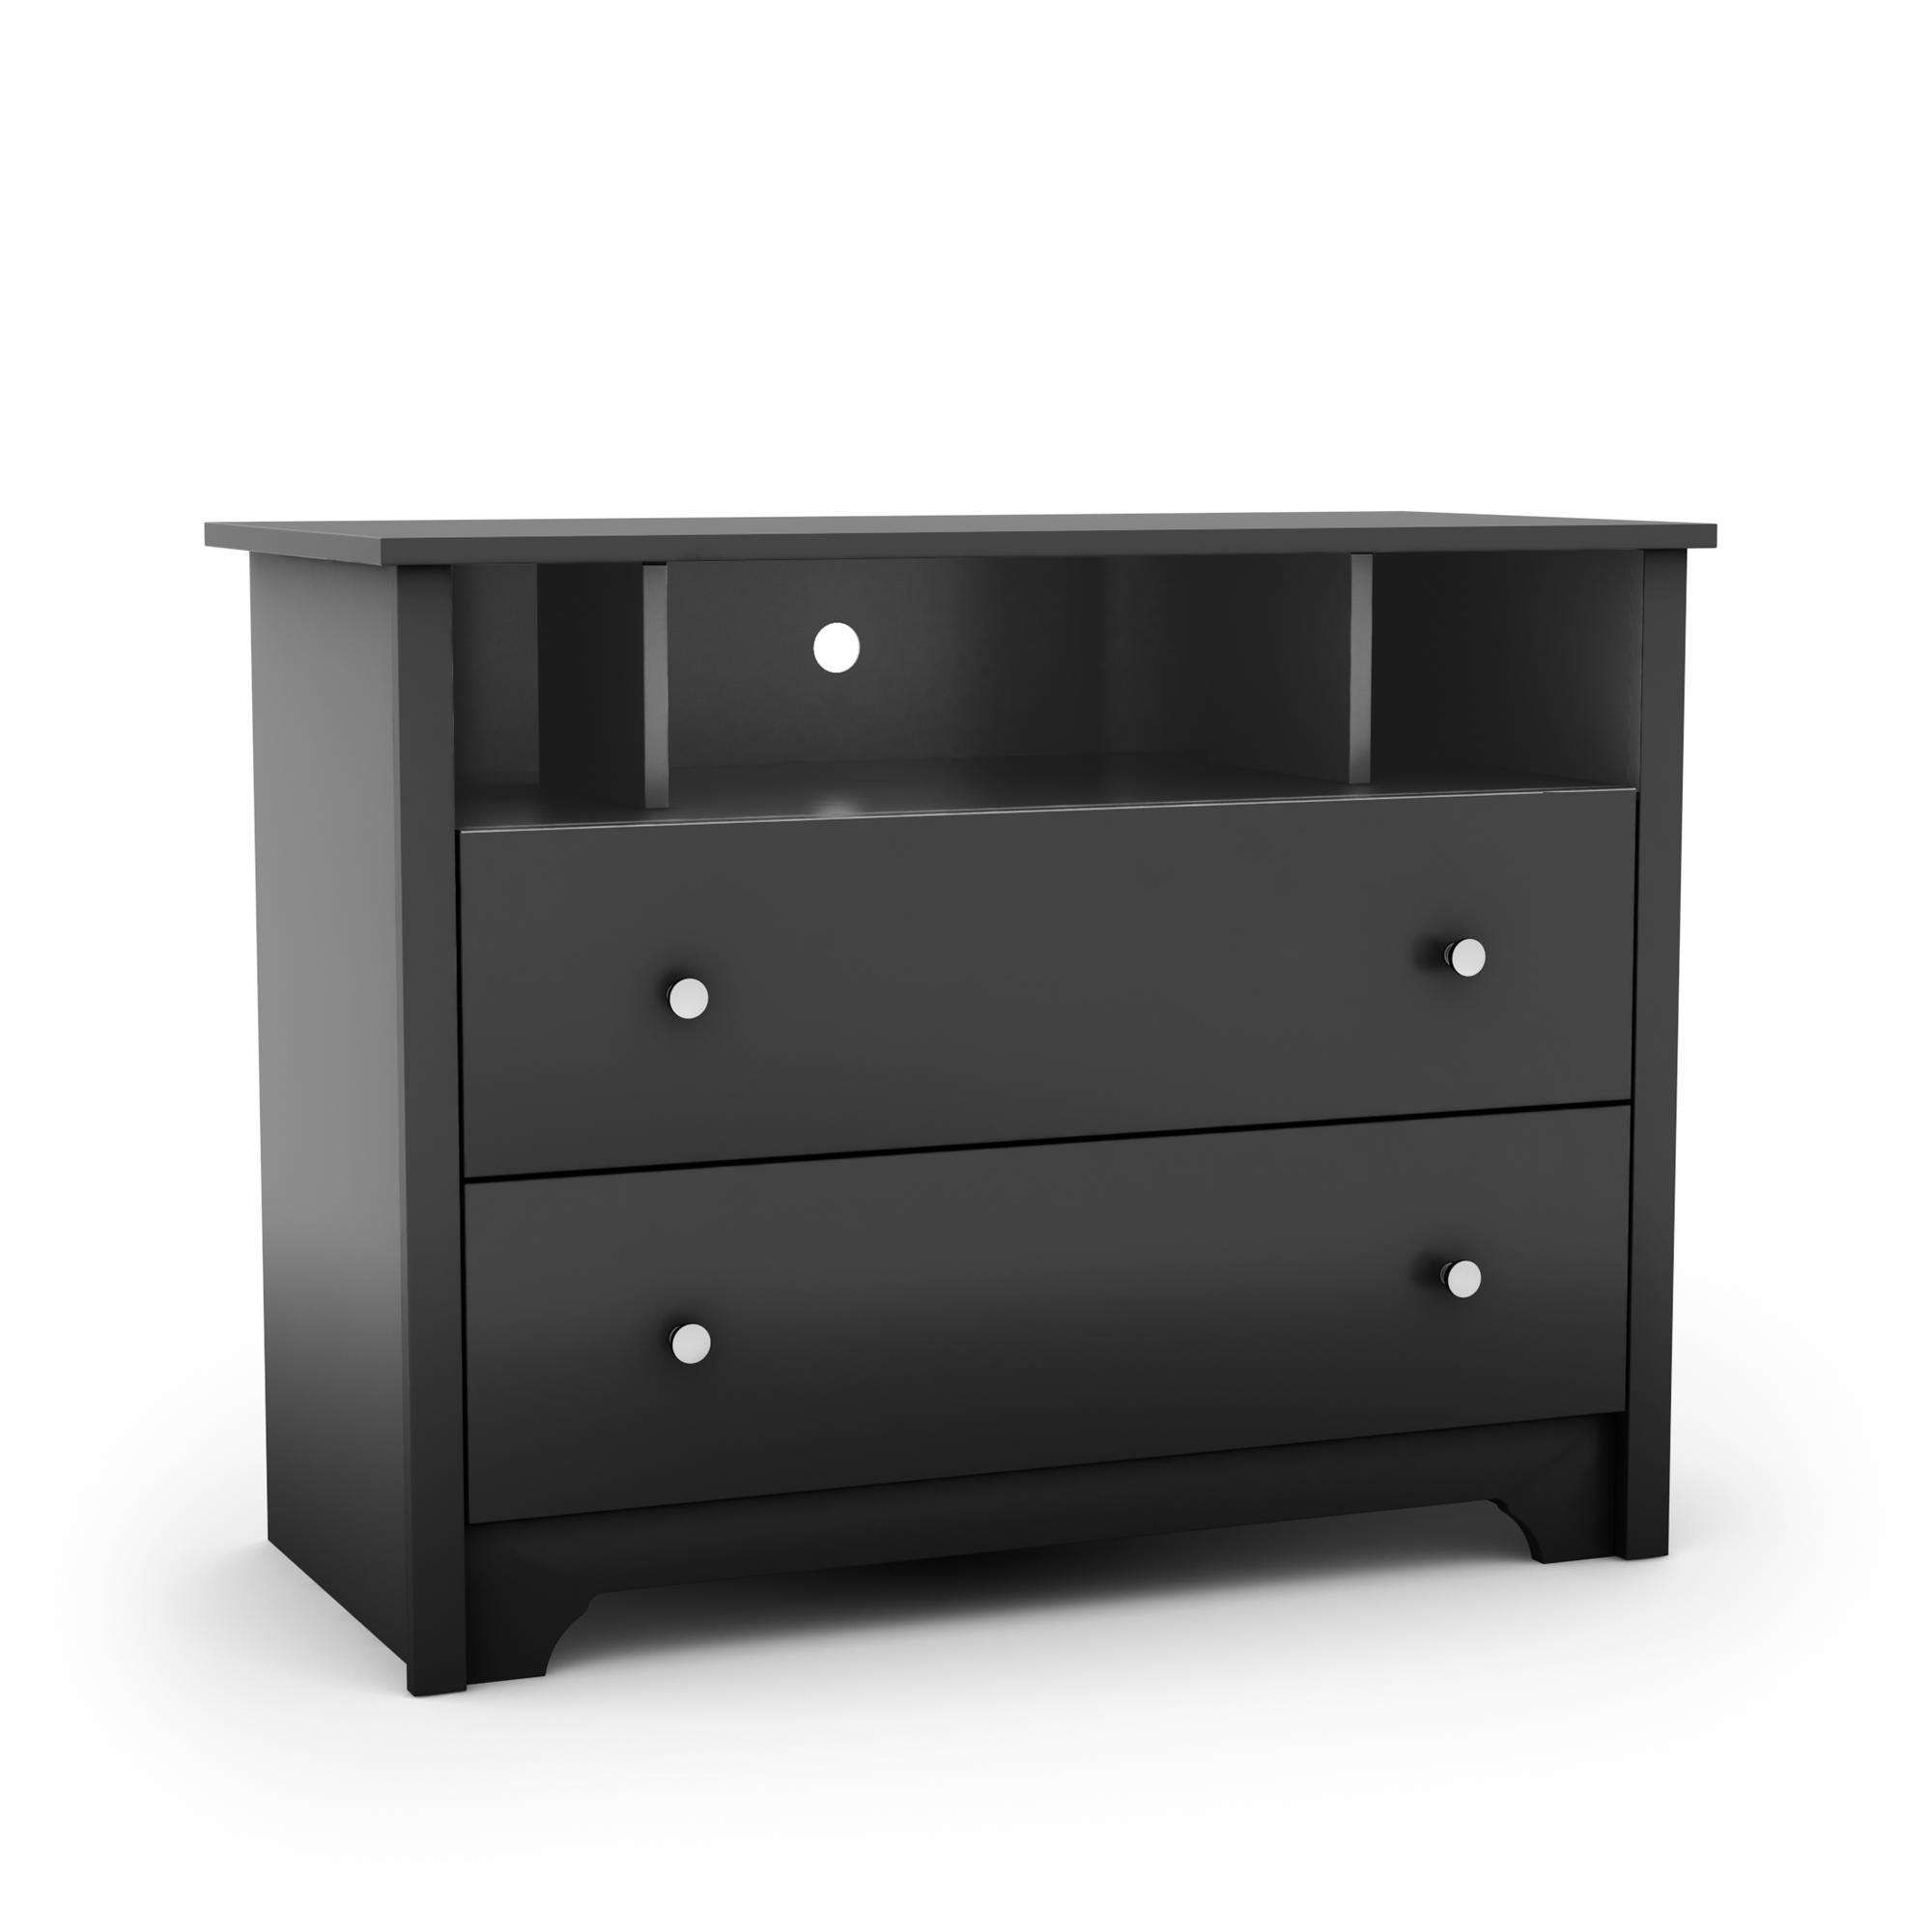 Square Black Tv Stand With Storage Drawers And Shelves Of Cool Tv Inside Black Tv Cabinets With Drawers (View 3 of 20)